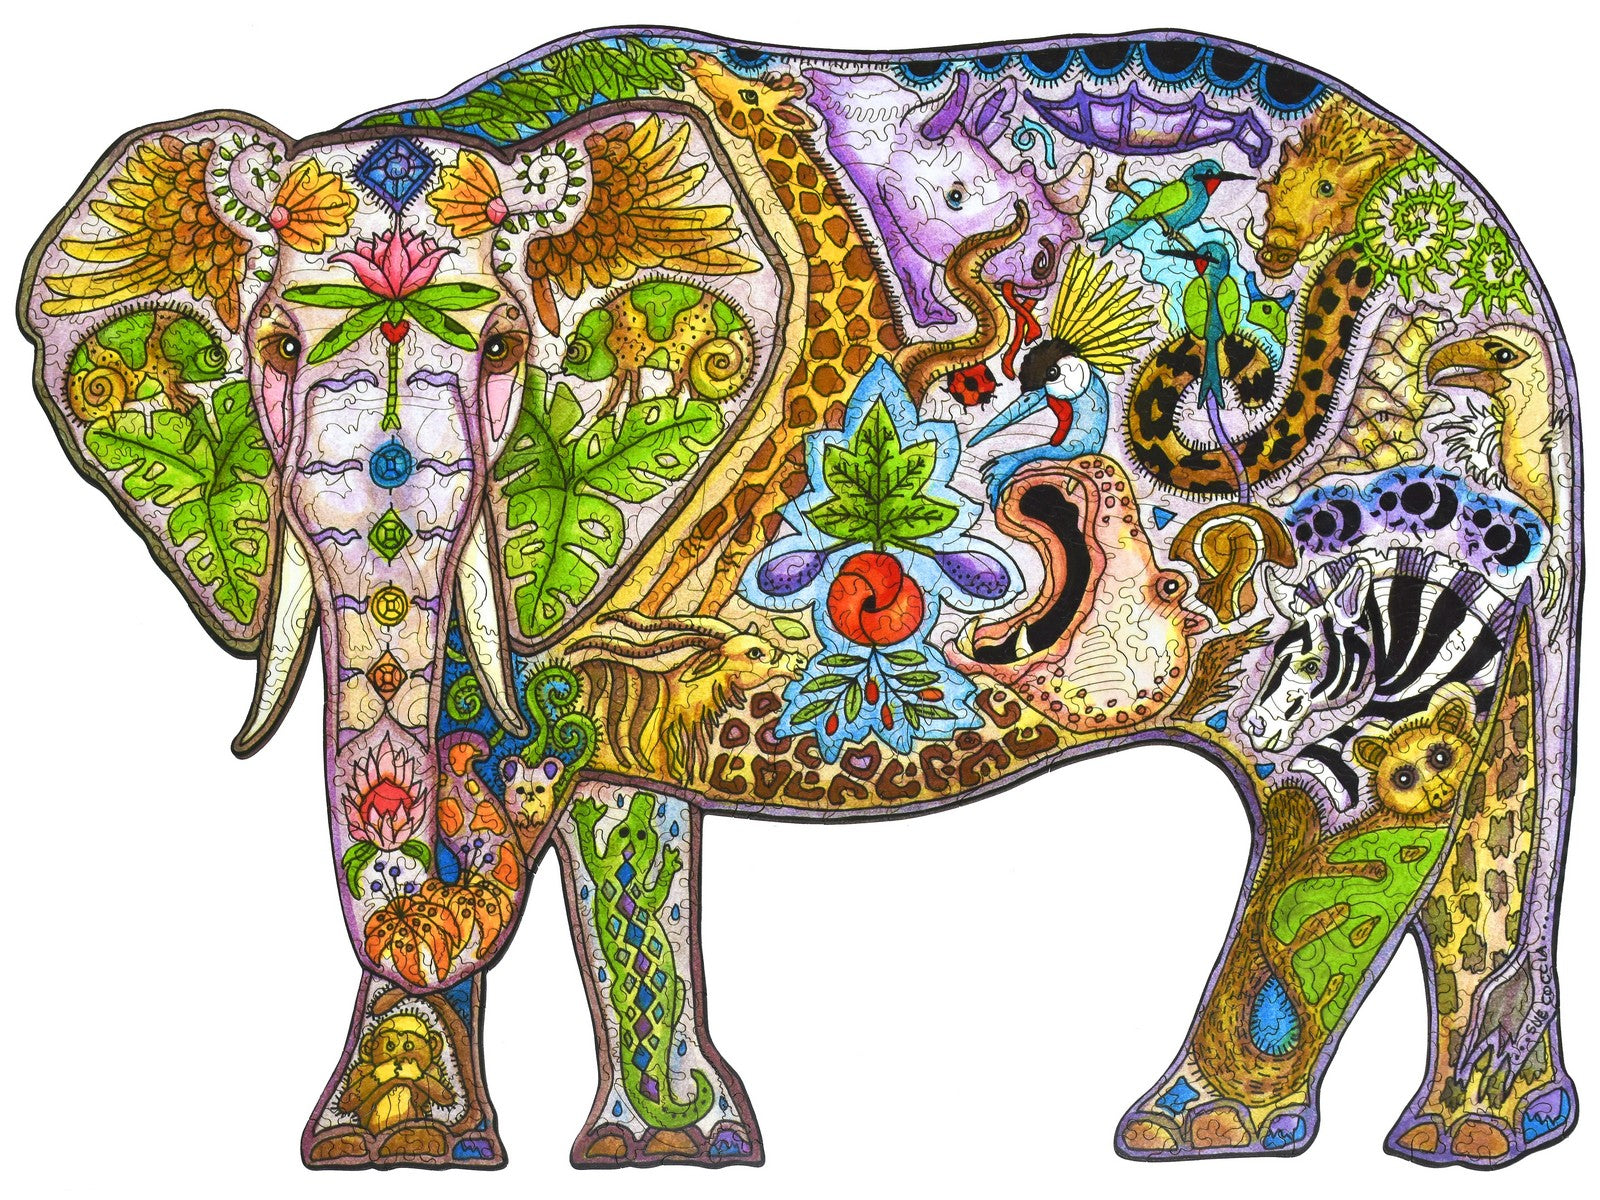 The front of the puzzle, Mabula Elephant, with an irregular border the shape of an elephant.